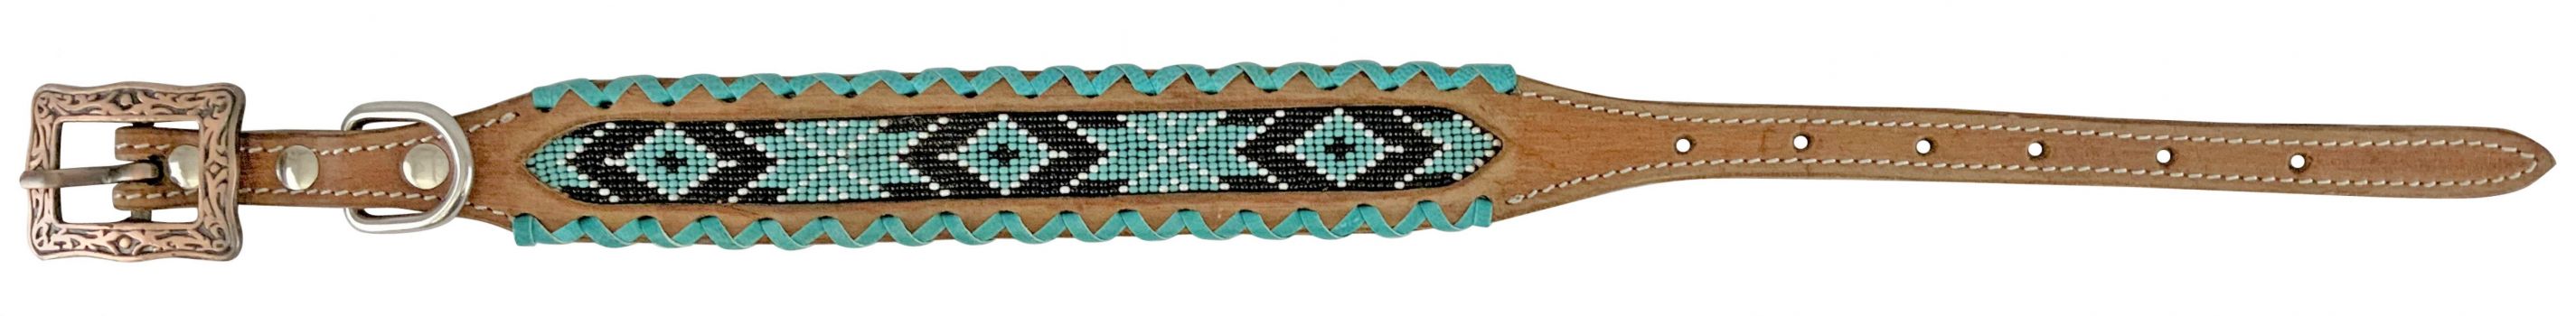 Showman Couture Genuine leather dog collar with beaded inlay - turquoise whipstitching